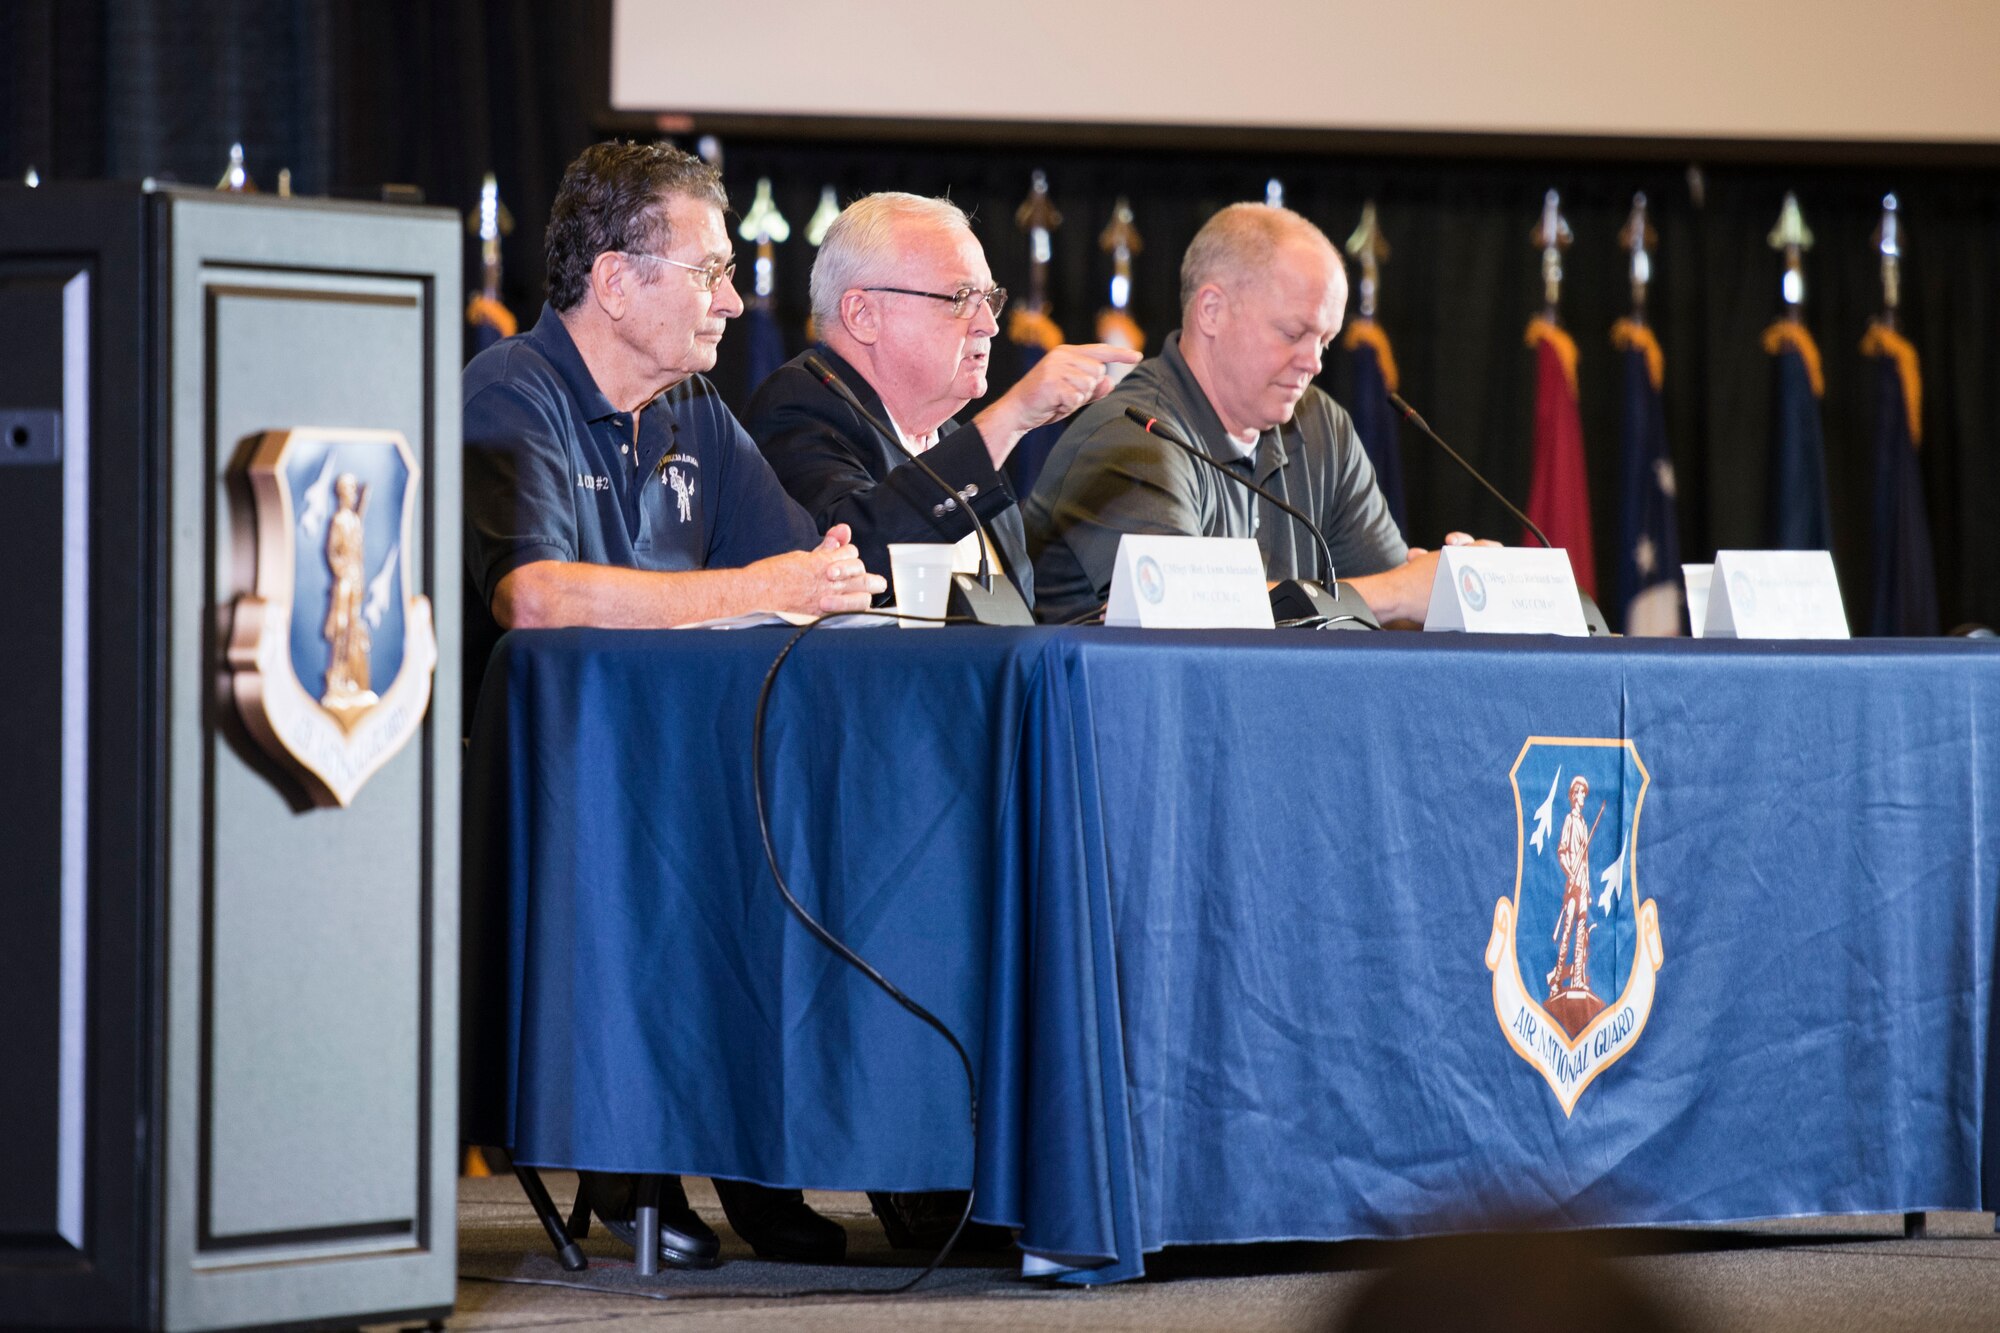 Three former Command Chiefs for the Air National Guard, retired Chief Master Sergeants Lynn Alexander, Richard Smith and Christopher Muncy, field questions from Airmen during the Enlisted Leadership Symposium at Camp Dawson, W.Va., Aug. 15-17. Nearly 350 Airmen representing Air National Guard units from each state, territory and the District of Columbia, attended the Enlisted Leadership Symposium, hosted by the Command Chief of the Air National Guard, Chief Master Ronald Anderson. The three-day event focused on leadership and professional development. Airmen, non-commissioned officers and senior non-commissioned officers were hand-selected by their units to attend the event. (U.S. Air National Guard photo/Senior Master Sgt. Emily Beightol-Deyerle)